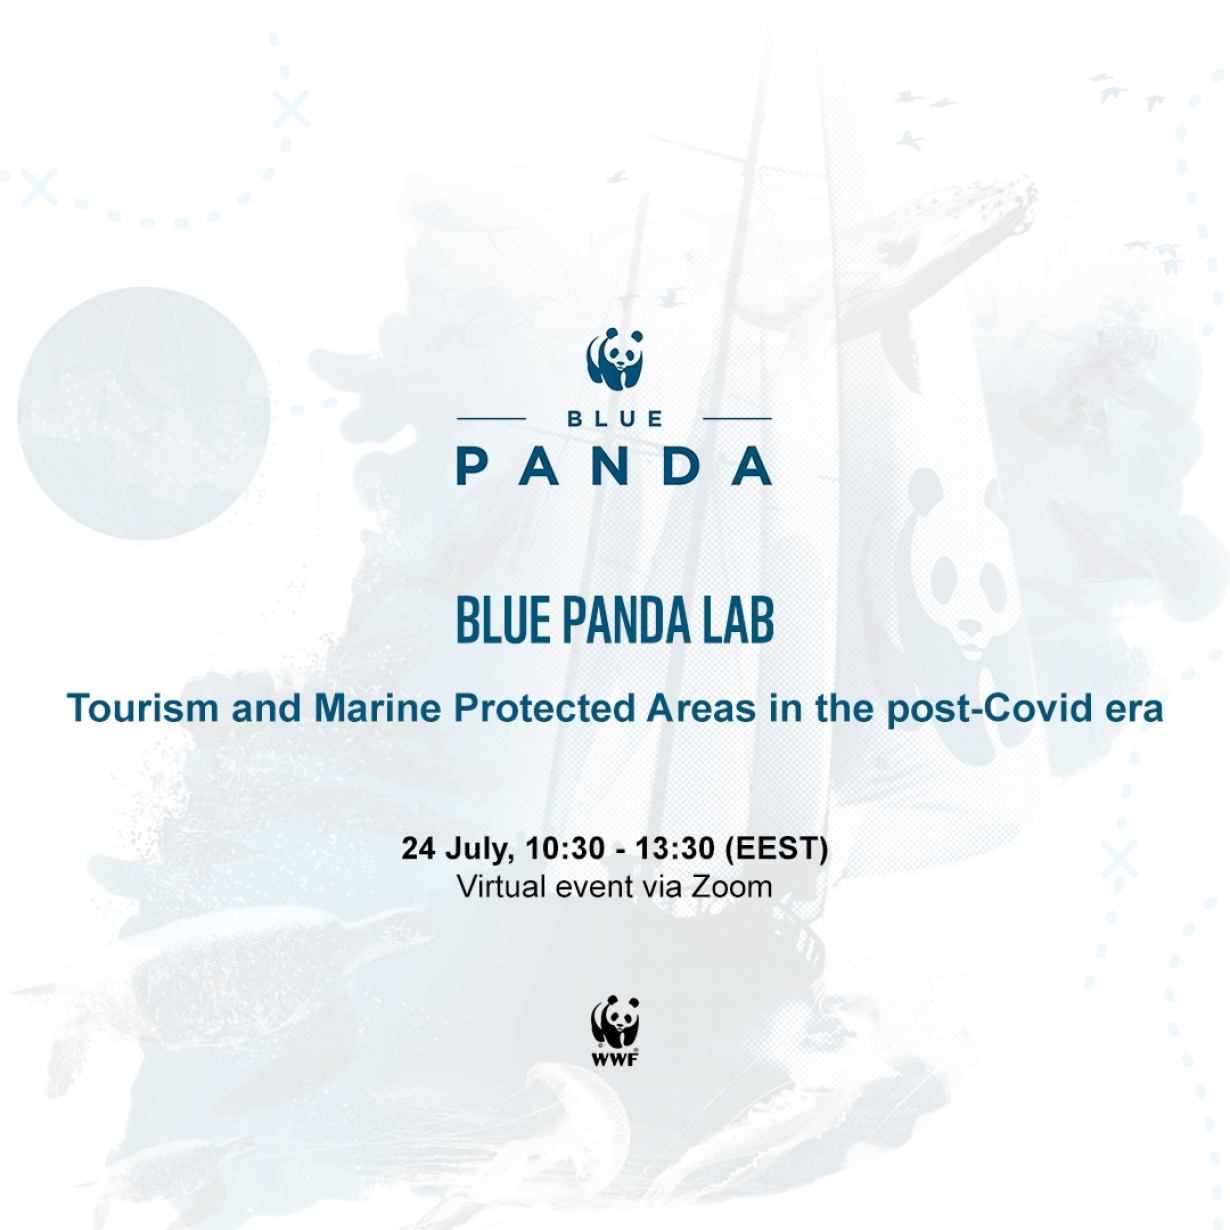 Online Event: Blue Panda Lab “Tourism and Marine Protected Areas in the post-Covid era”